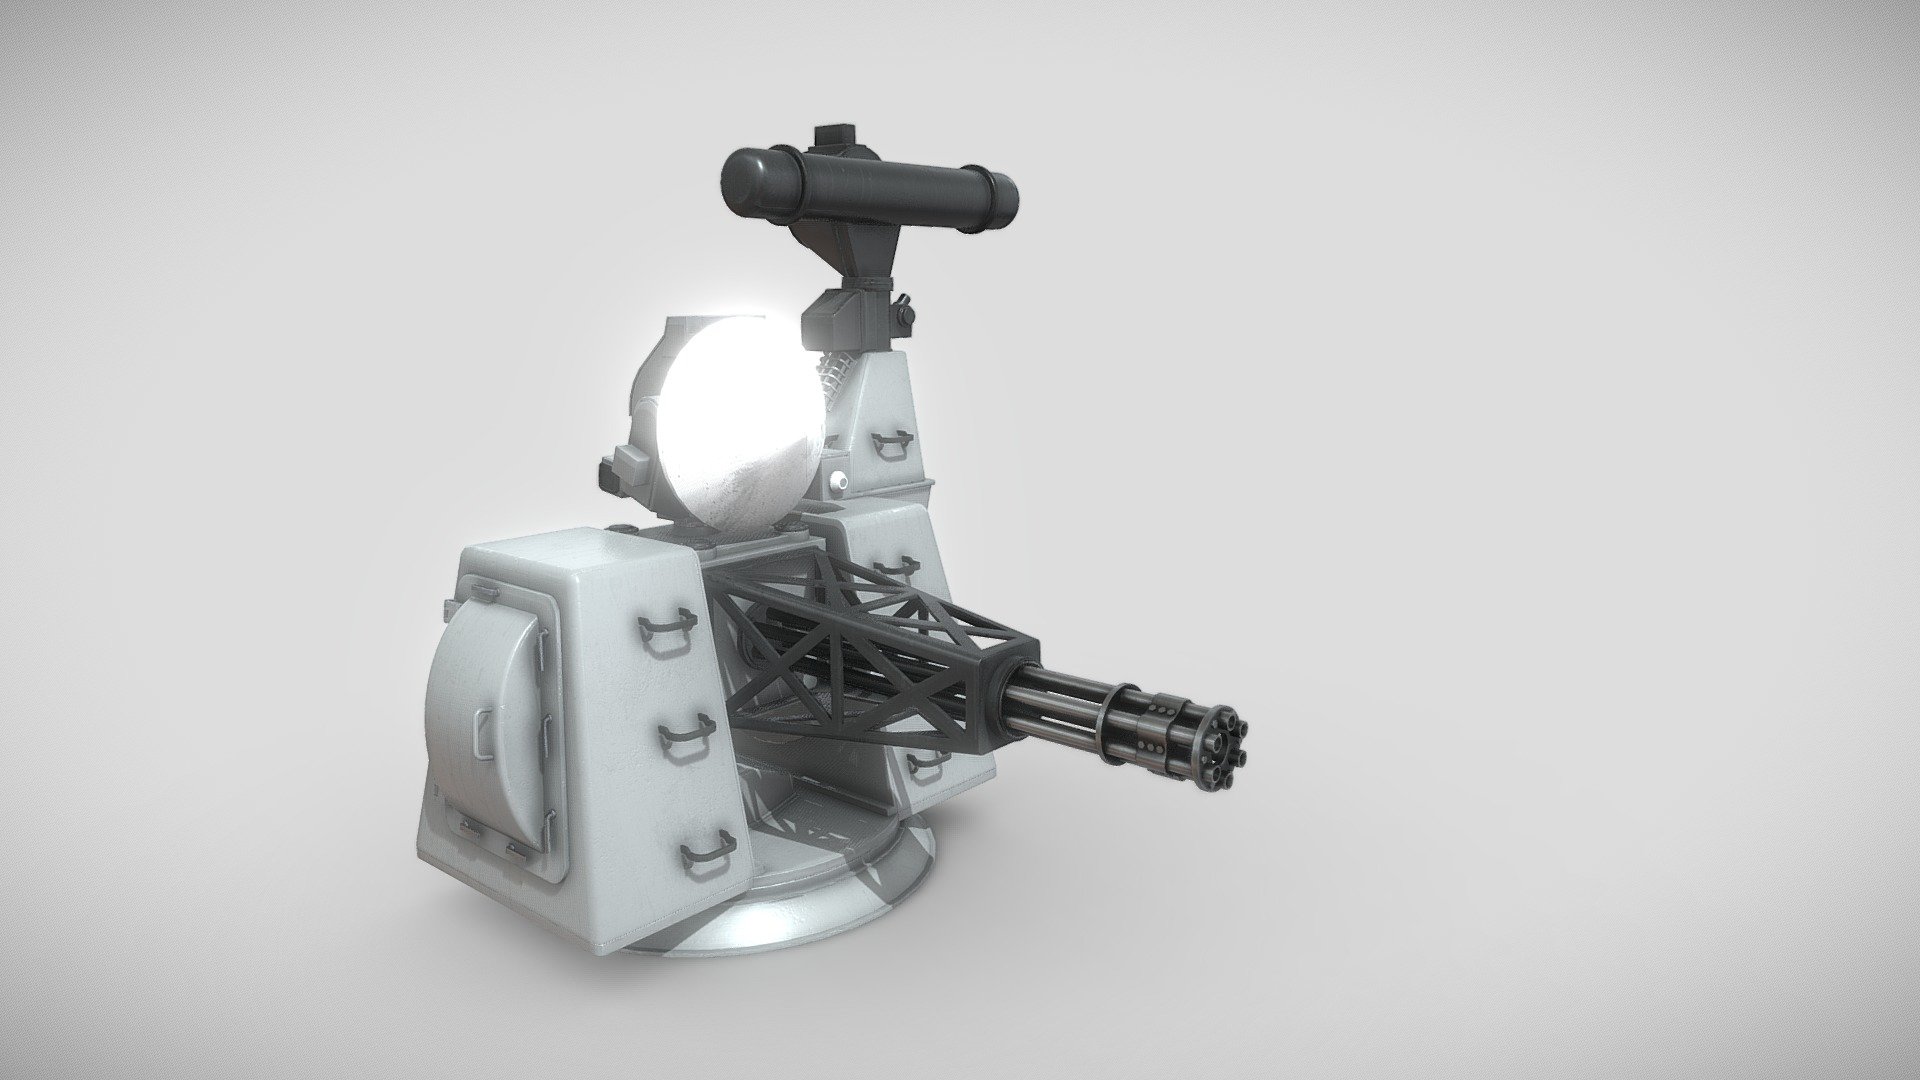 The Goalkeeper CIWS is a Dutch close-in weapon system.

This 3D model was created using 3ds Max, with textures designed in Substance Painter. The model has been meticulously unwrapped and divided into separate parts, enabling the base and turret to rotate seamlessly. If necessary, I am also capable of exporting the textures in various formats suitable for Unity, Unreal Engine, or V-Ray integration 3d model